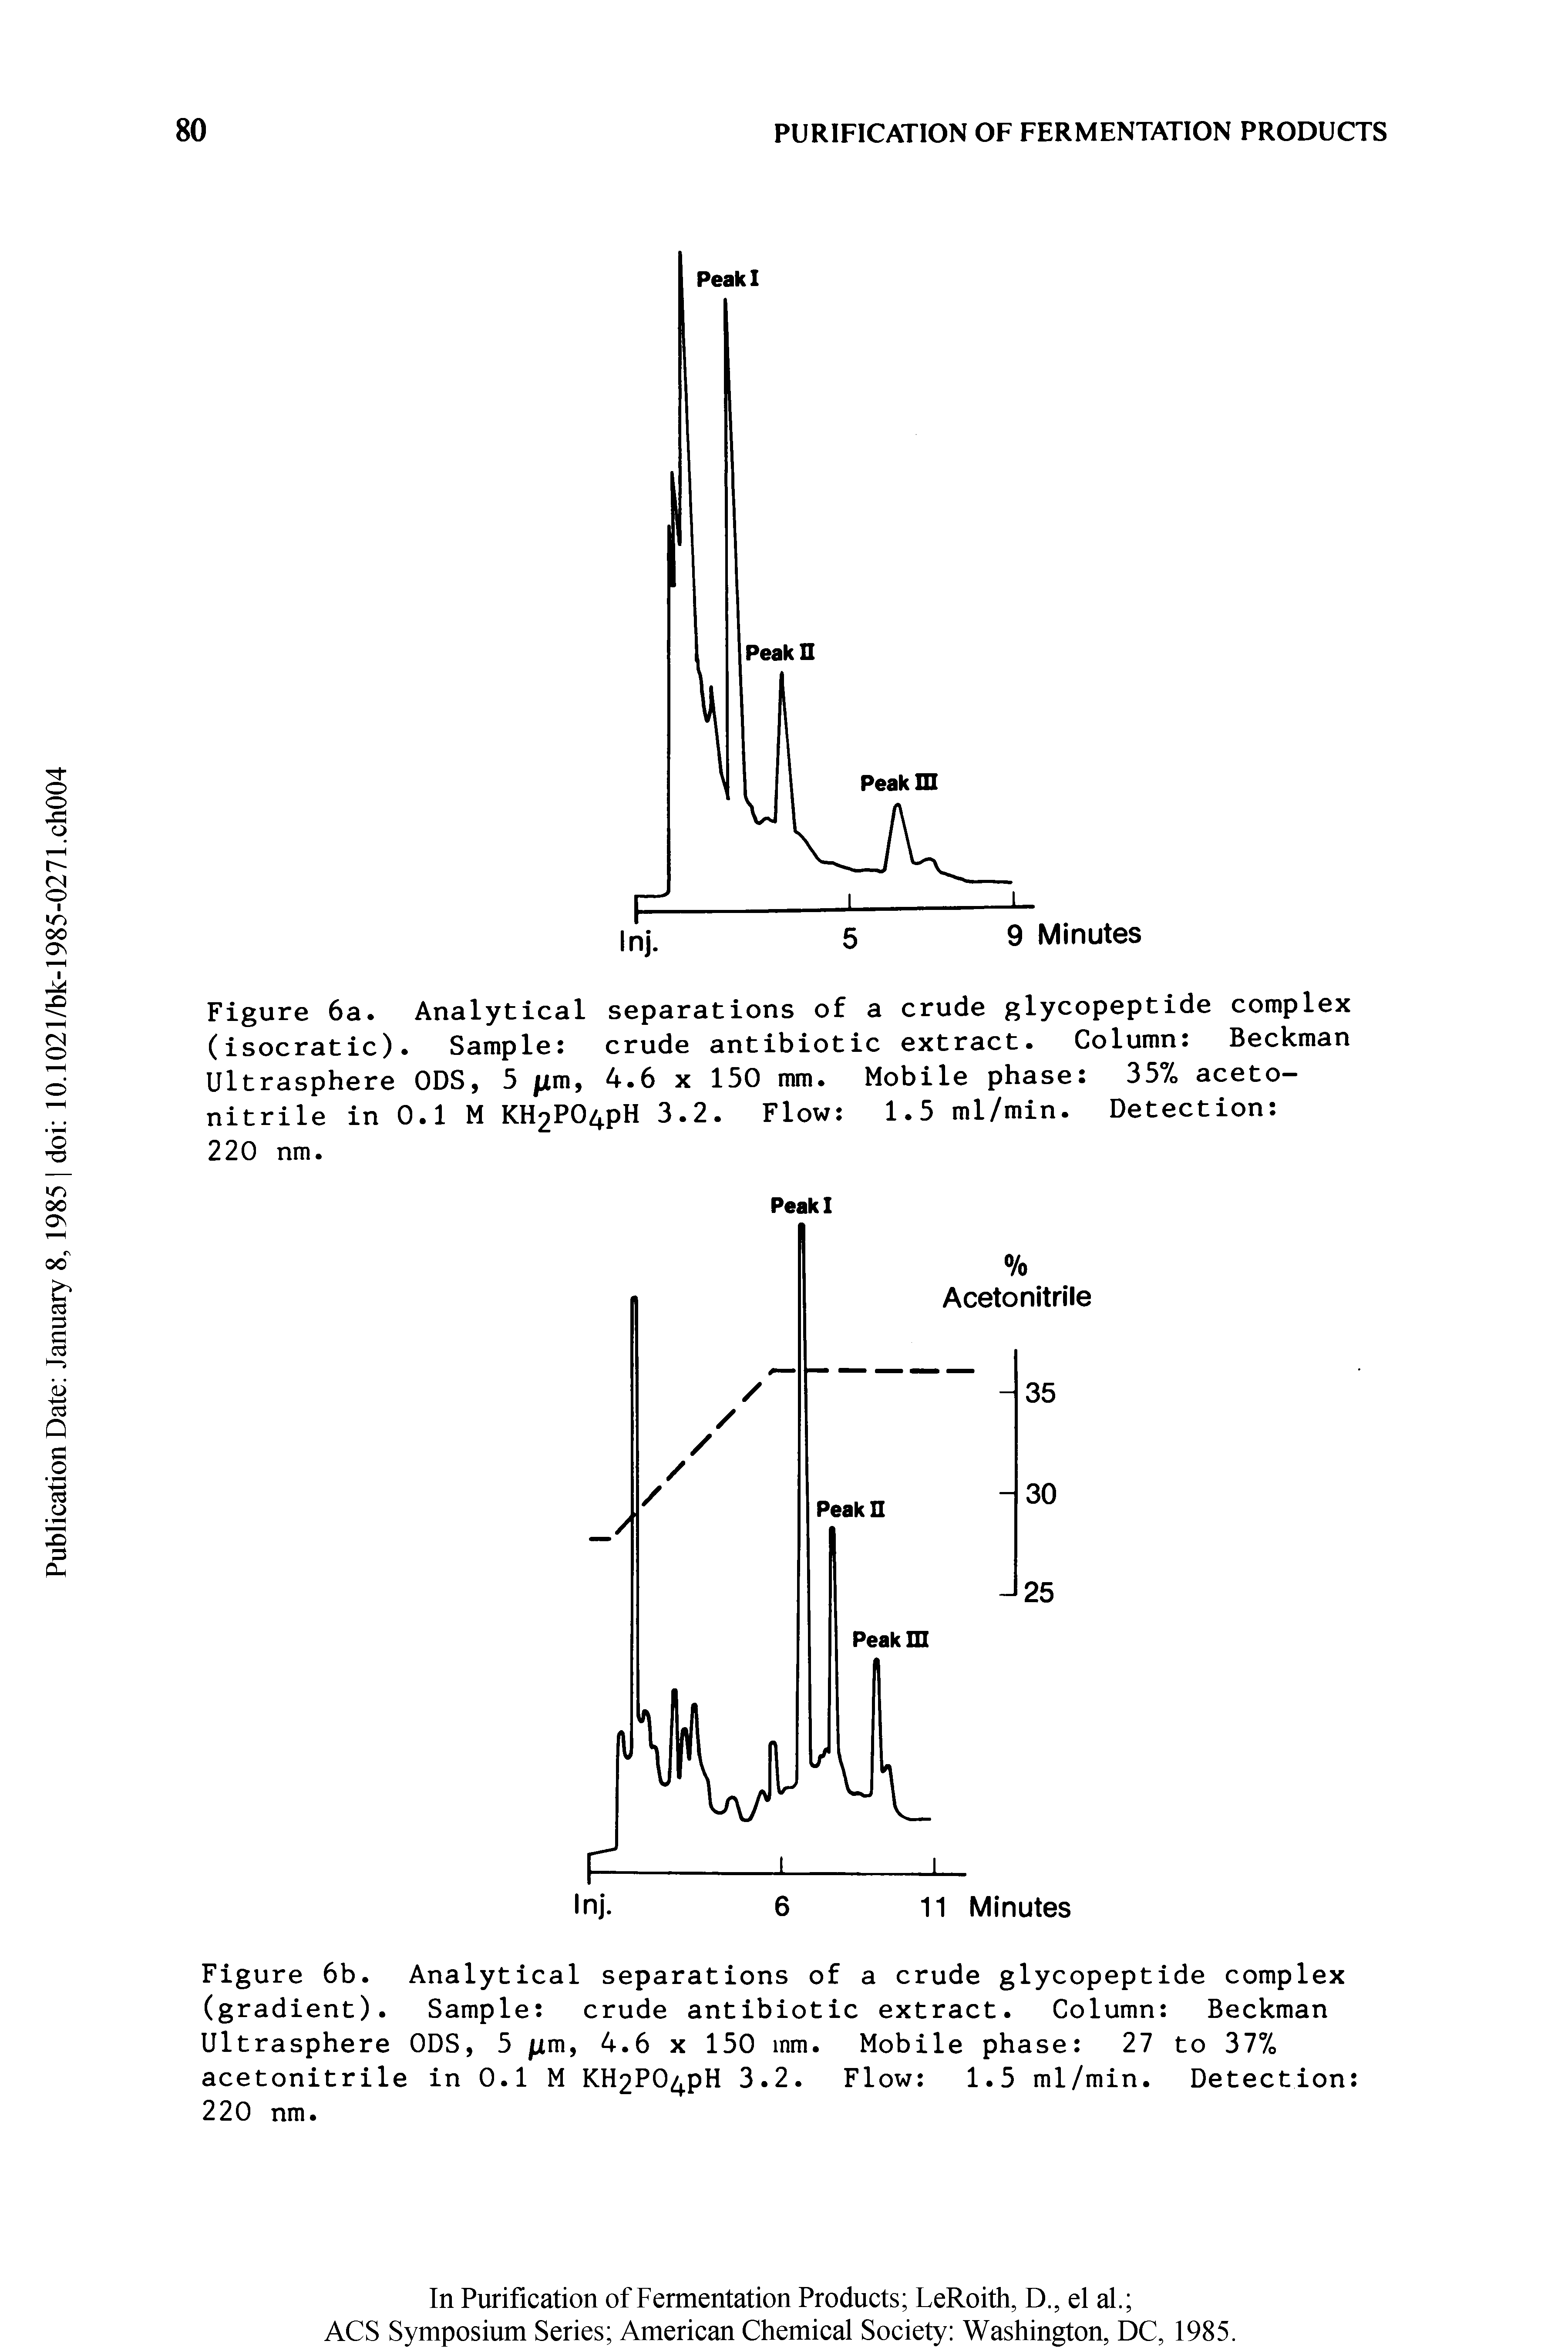 Figure 6a. Analytical separations of a crude glycopeptide complex (isocratic). Sample crude antibiotic extract. Column Beckman Ultrasphere ODS, 5 jzm, 4.6 x 150 mm. Mobile phase 35%, acetonitrile in 0.1 M KH2P04pH 3.2. Flow 1.5 ml/min. Detection ...